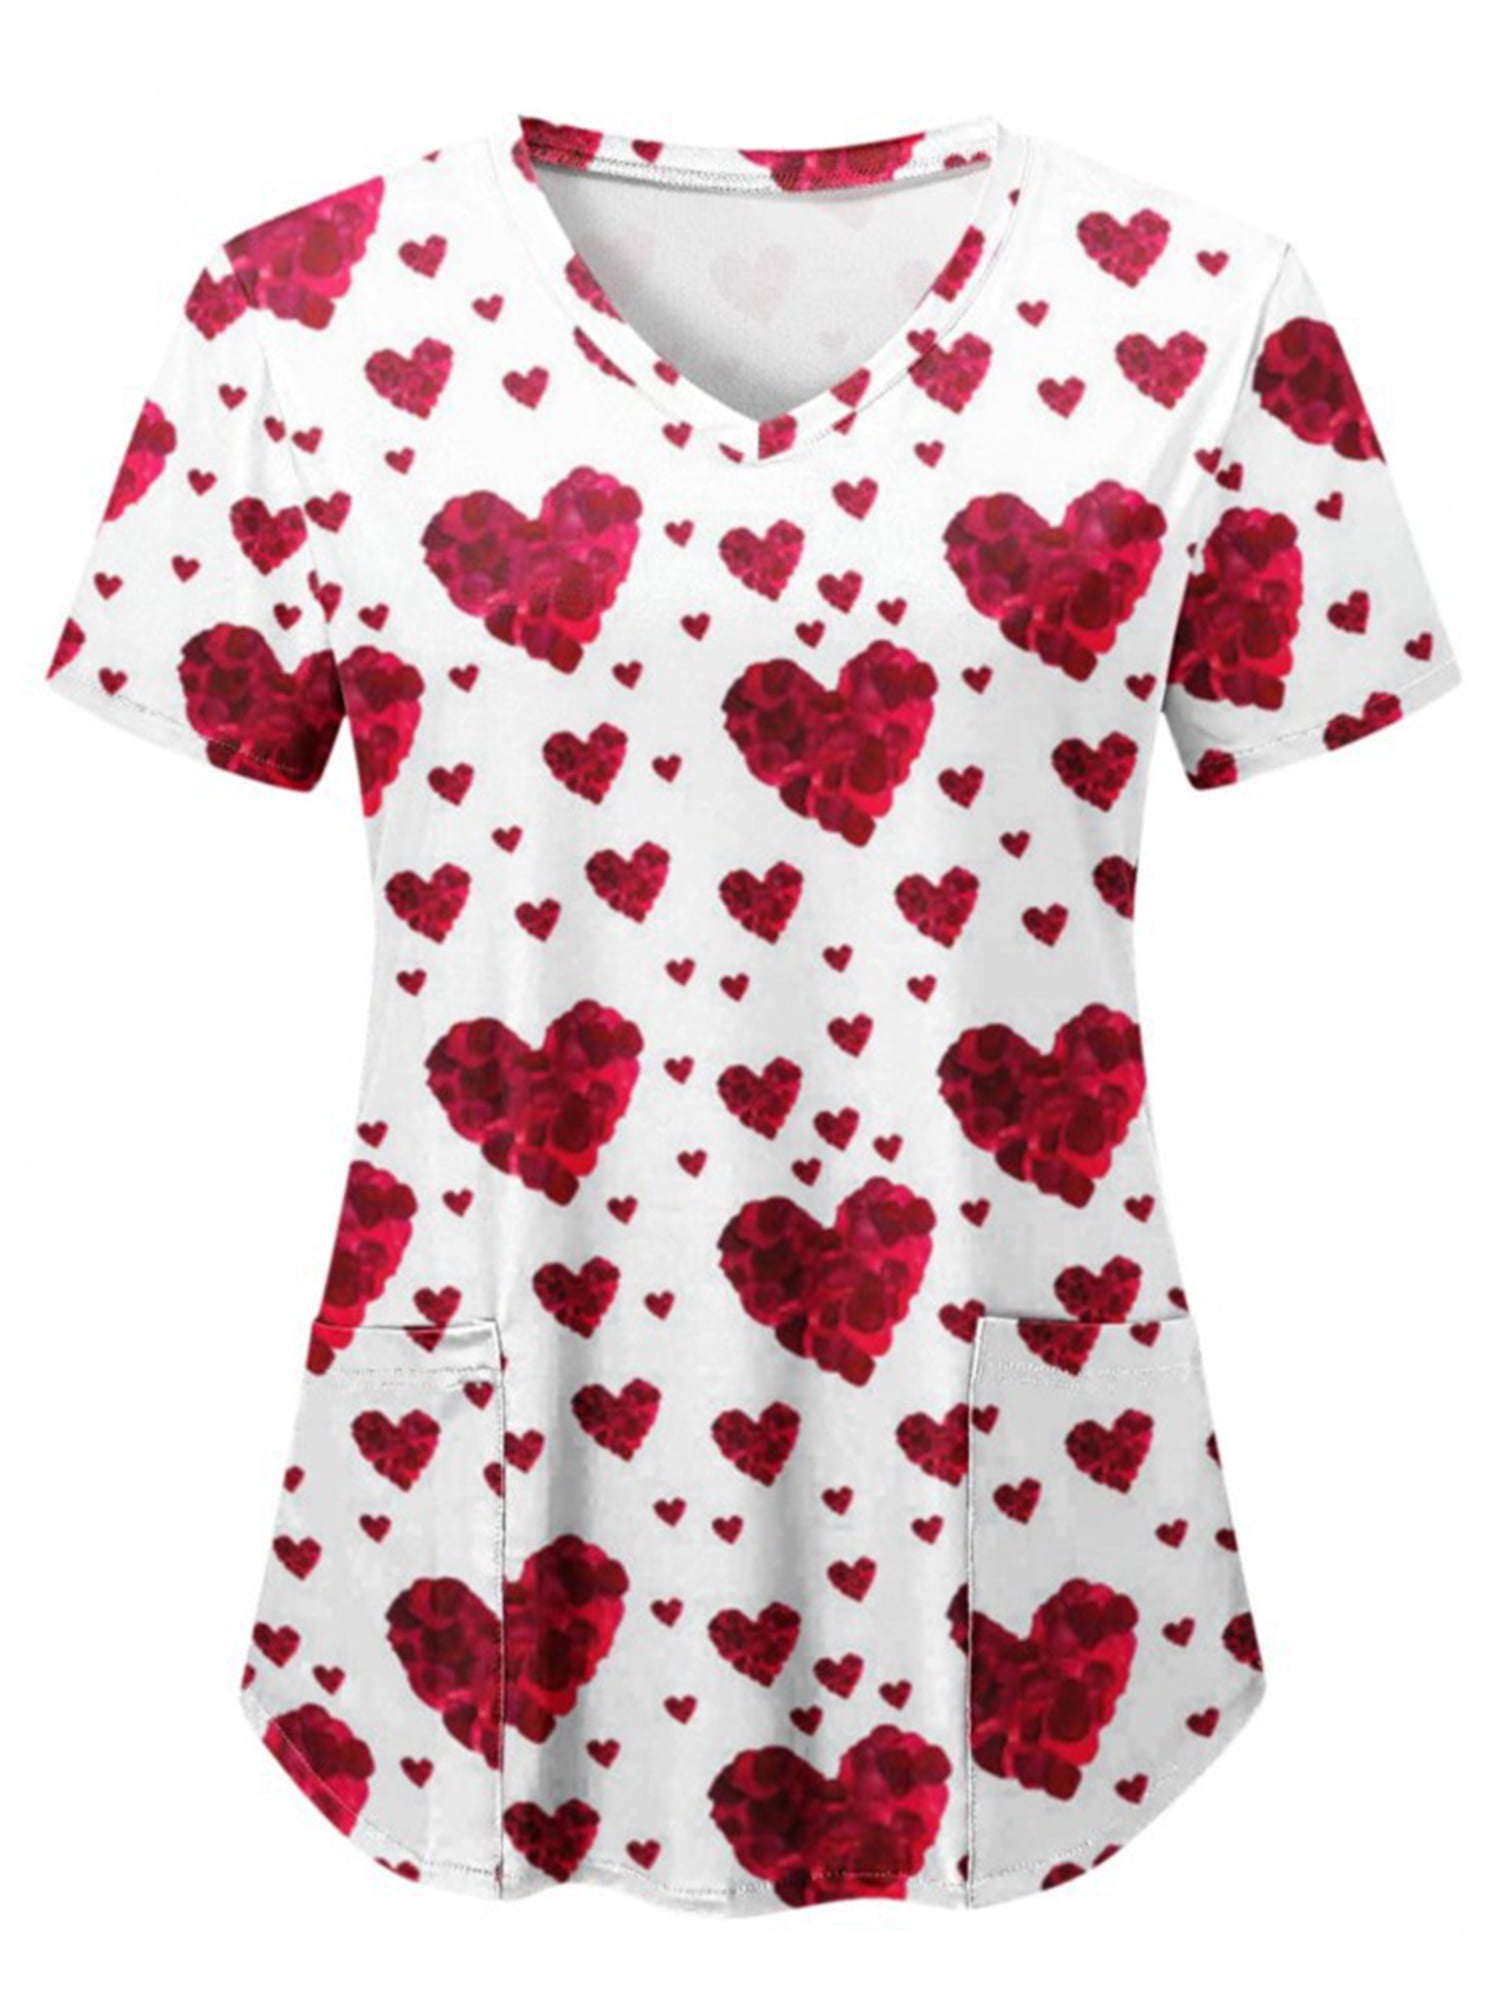 Womens Valentine's Day Heart Printed Scrub_Tops with Pockets Short Sleeve V Neck Mock Wrap Top Holiday Pullover Tops 